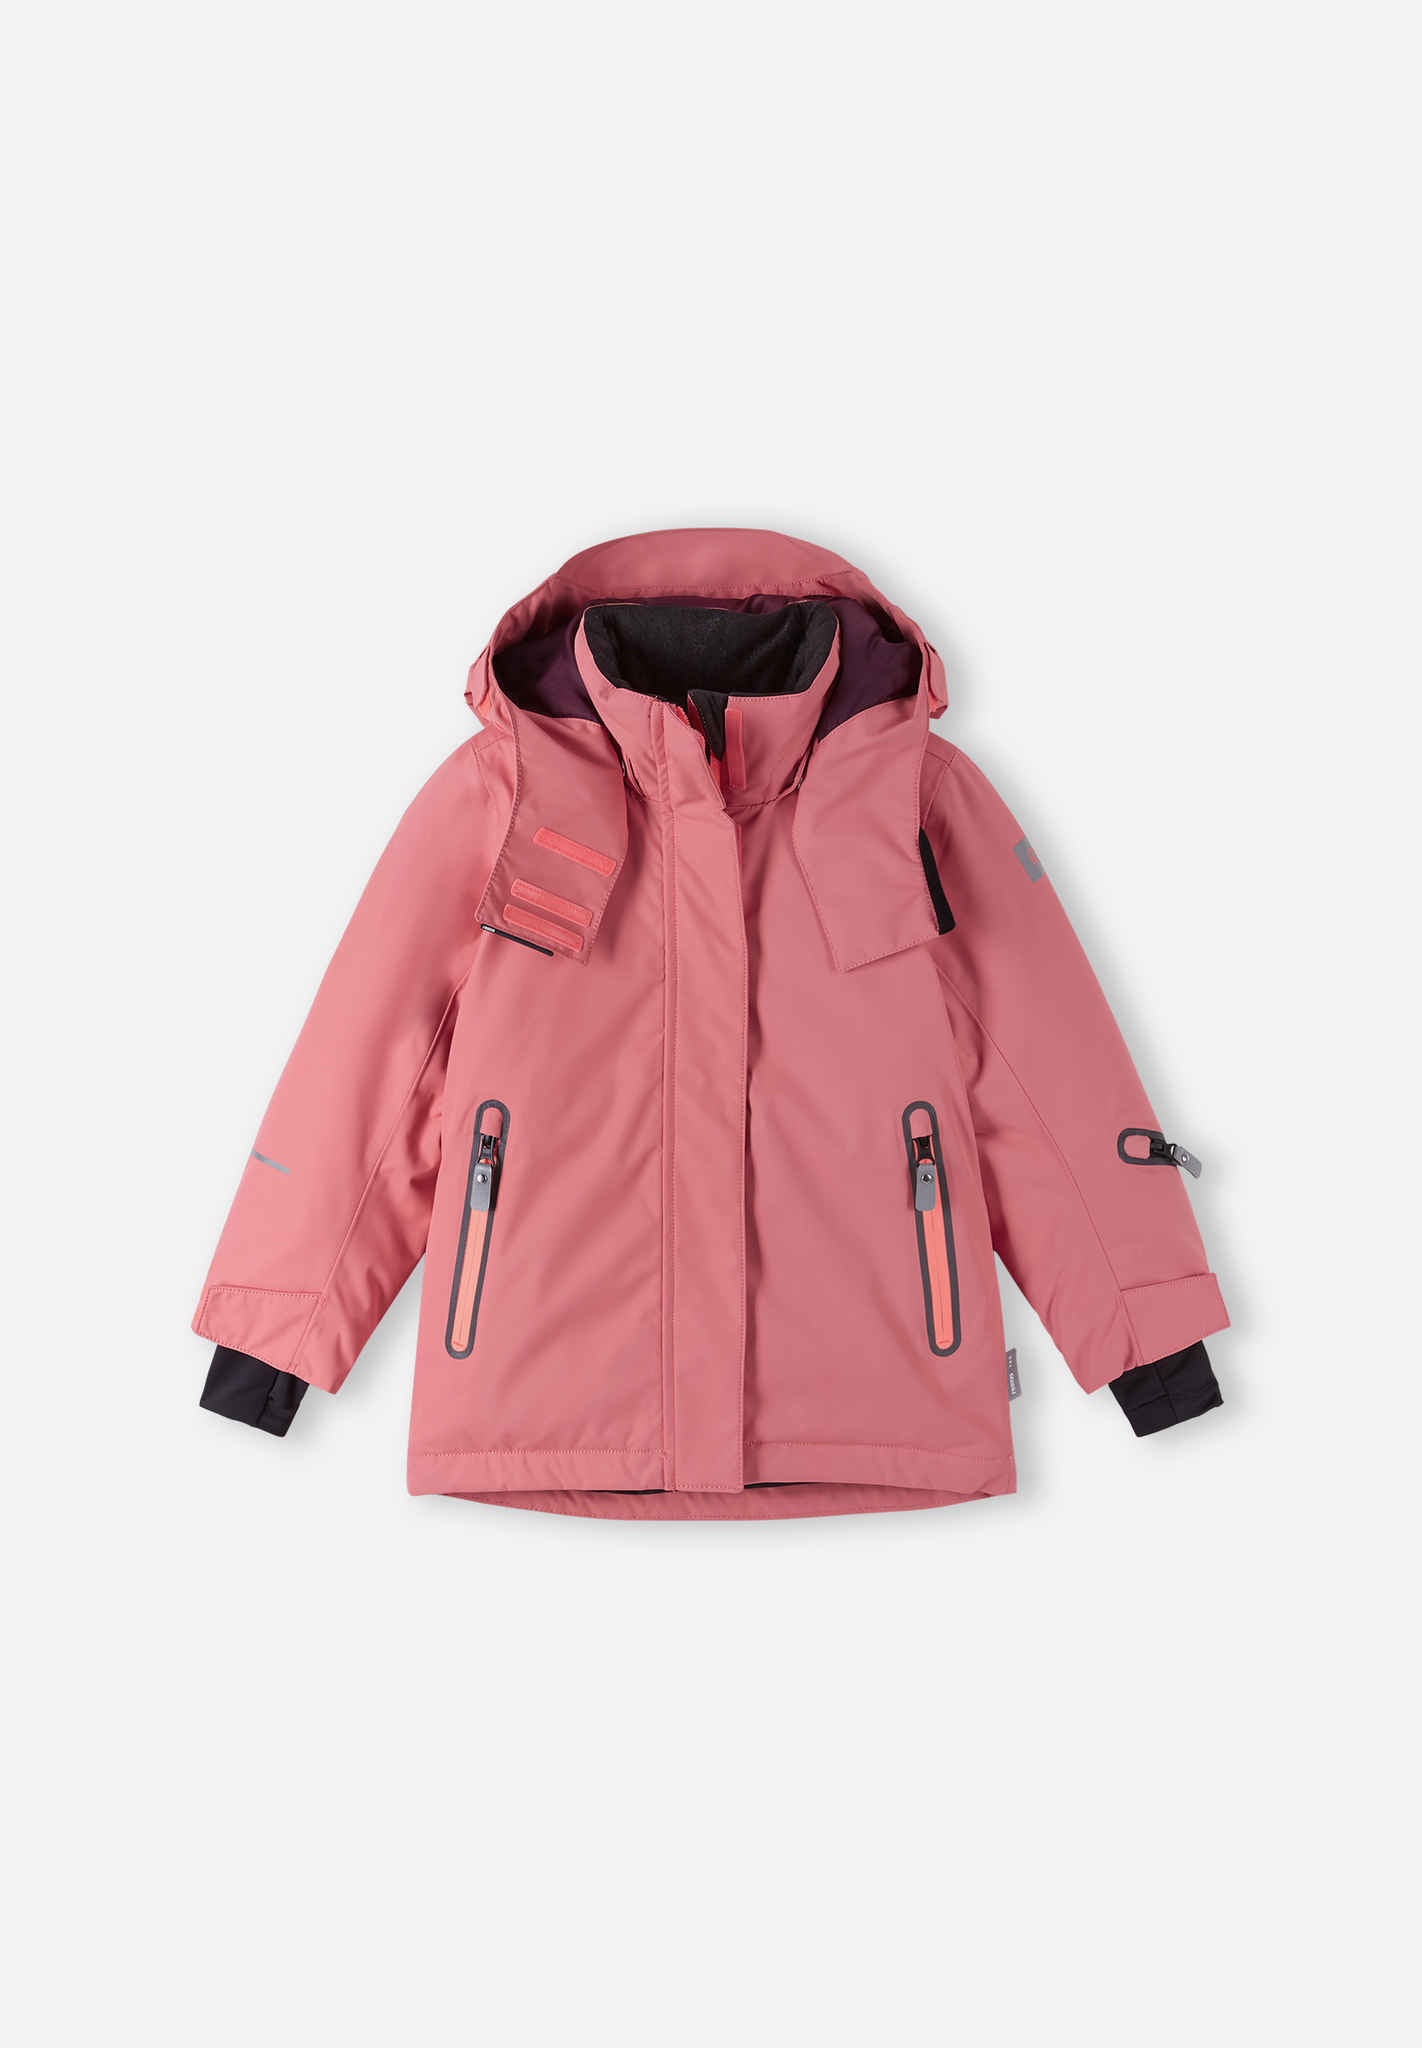 Durable US Reima Shop Kids Outerwear from